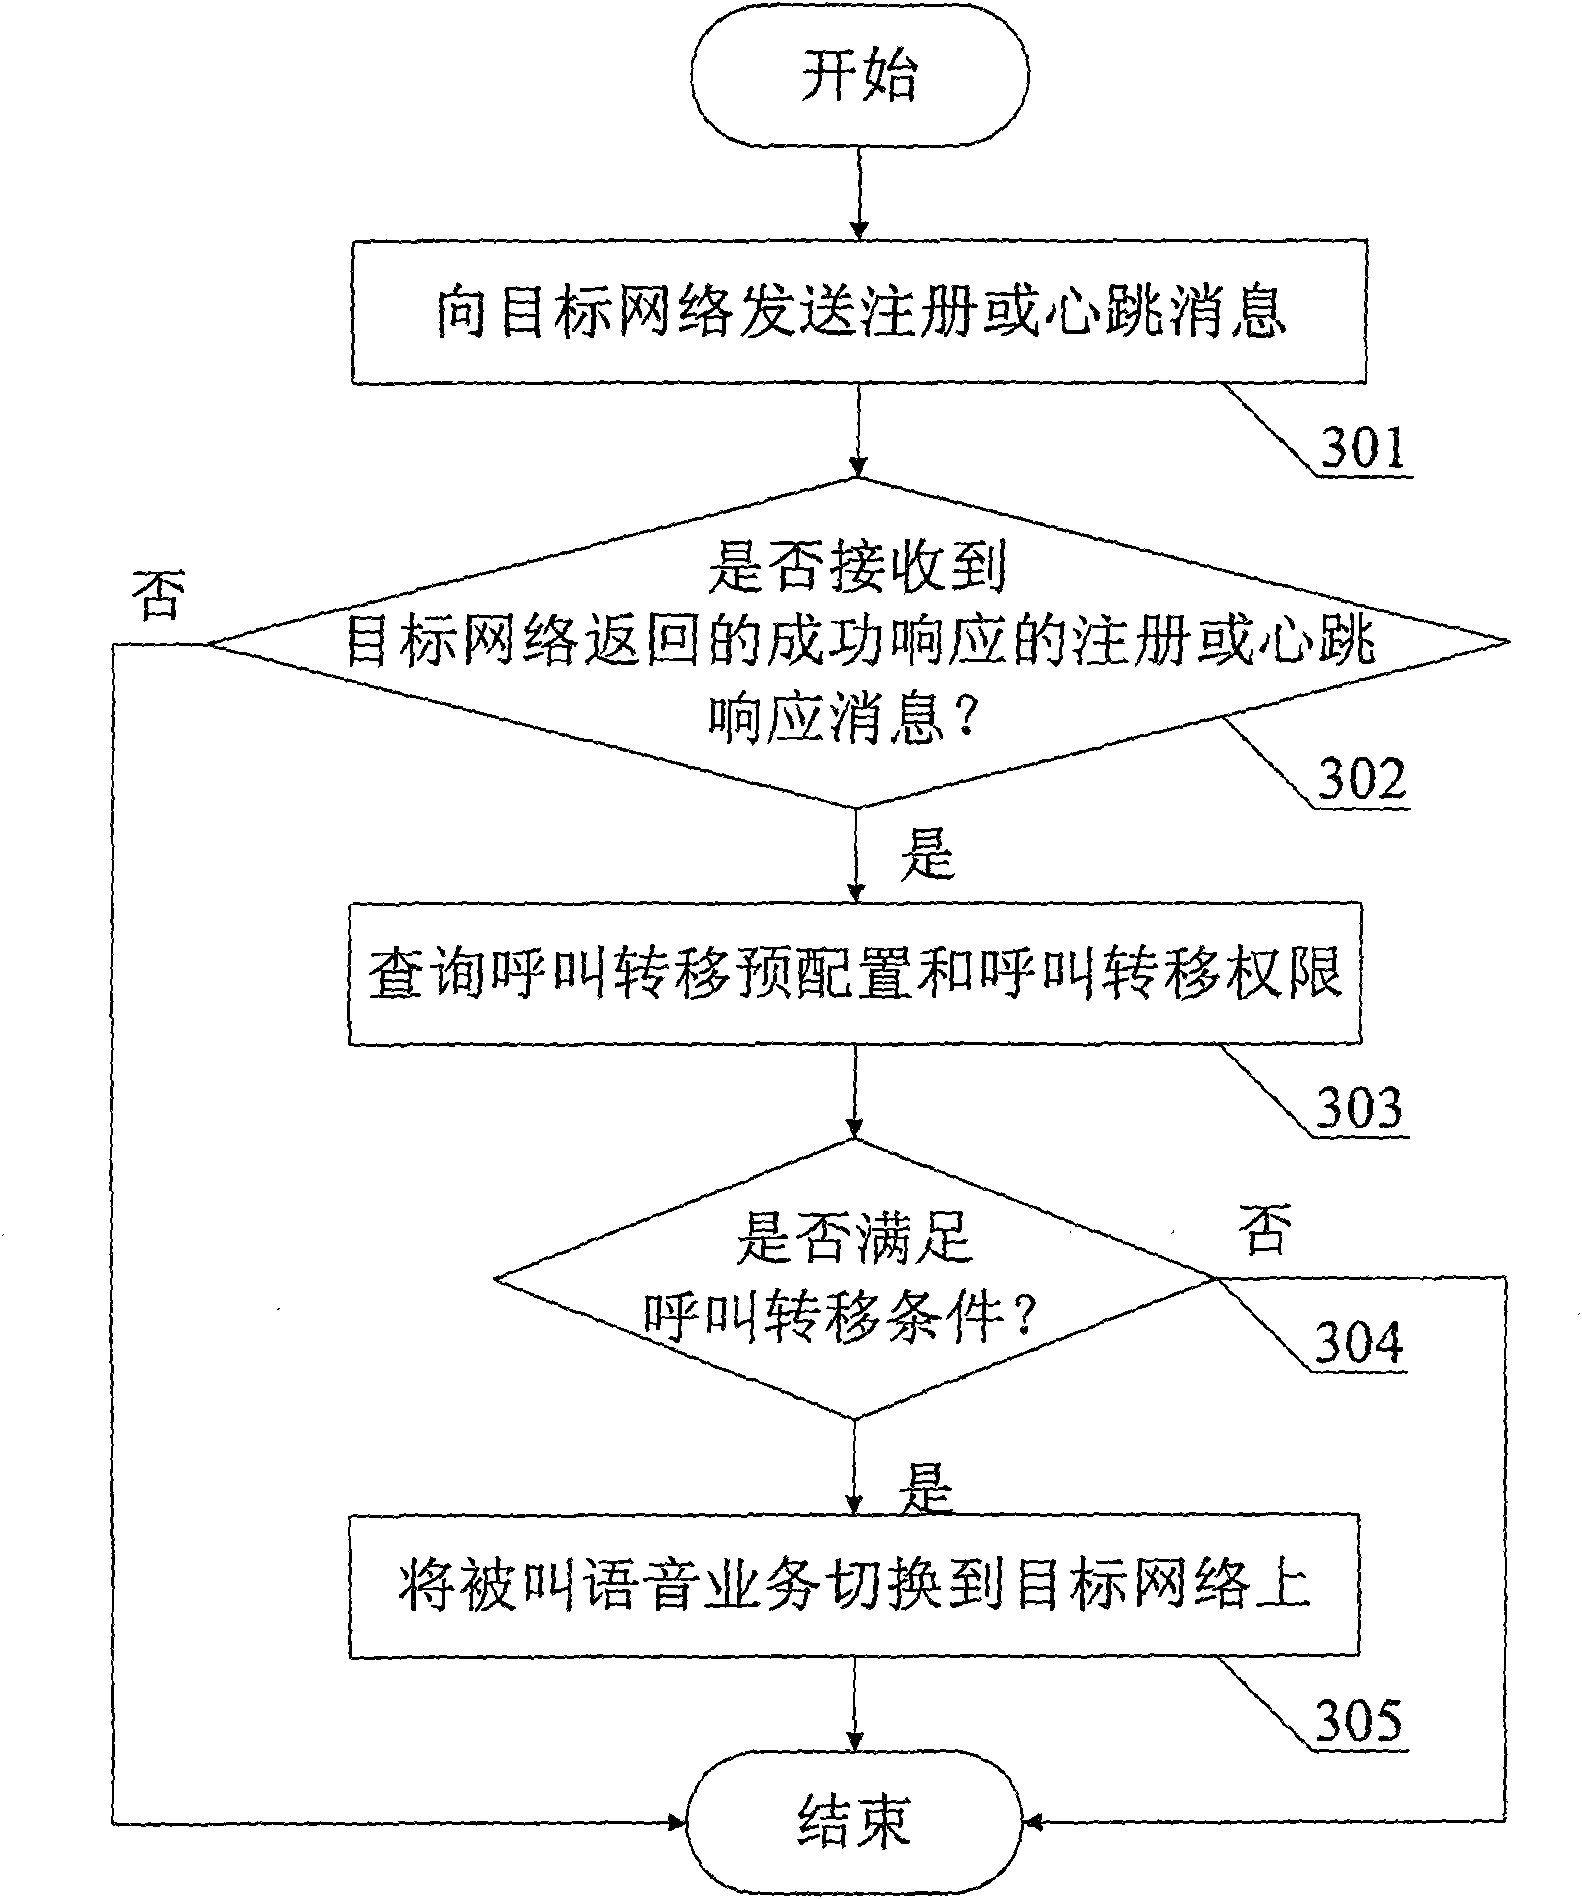 Method and system for switching a called voice service